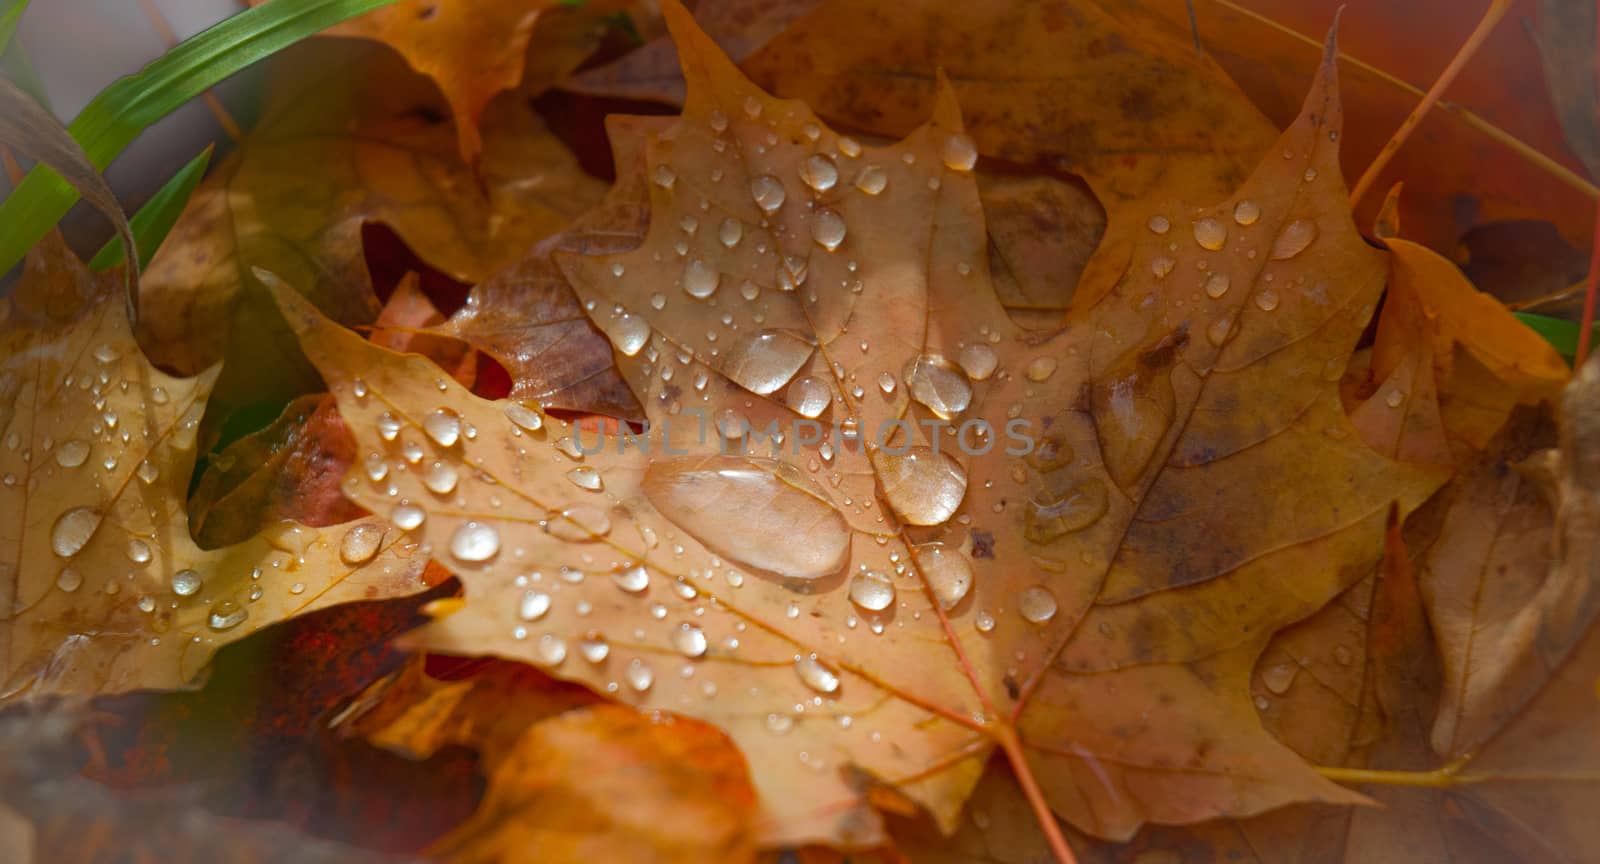 Colorful maple leaves with glowing drops of rain water lay in autumn woods. Ottawa.  Ontario, Canada.